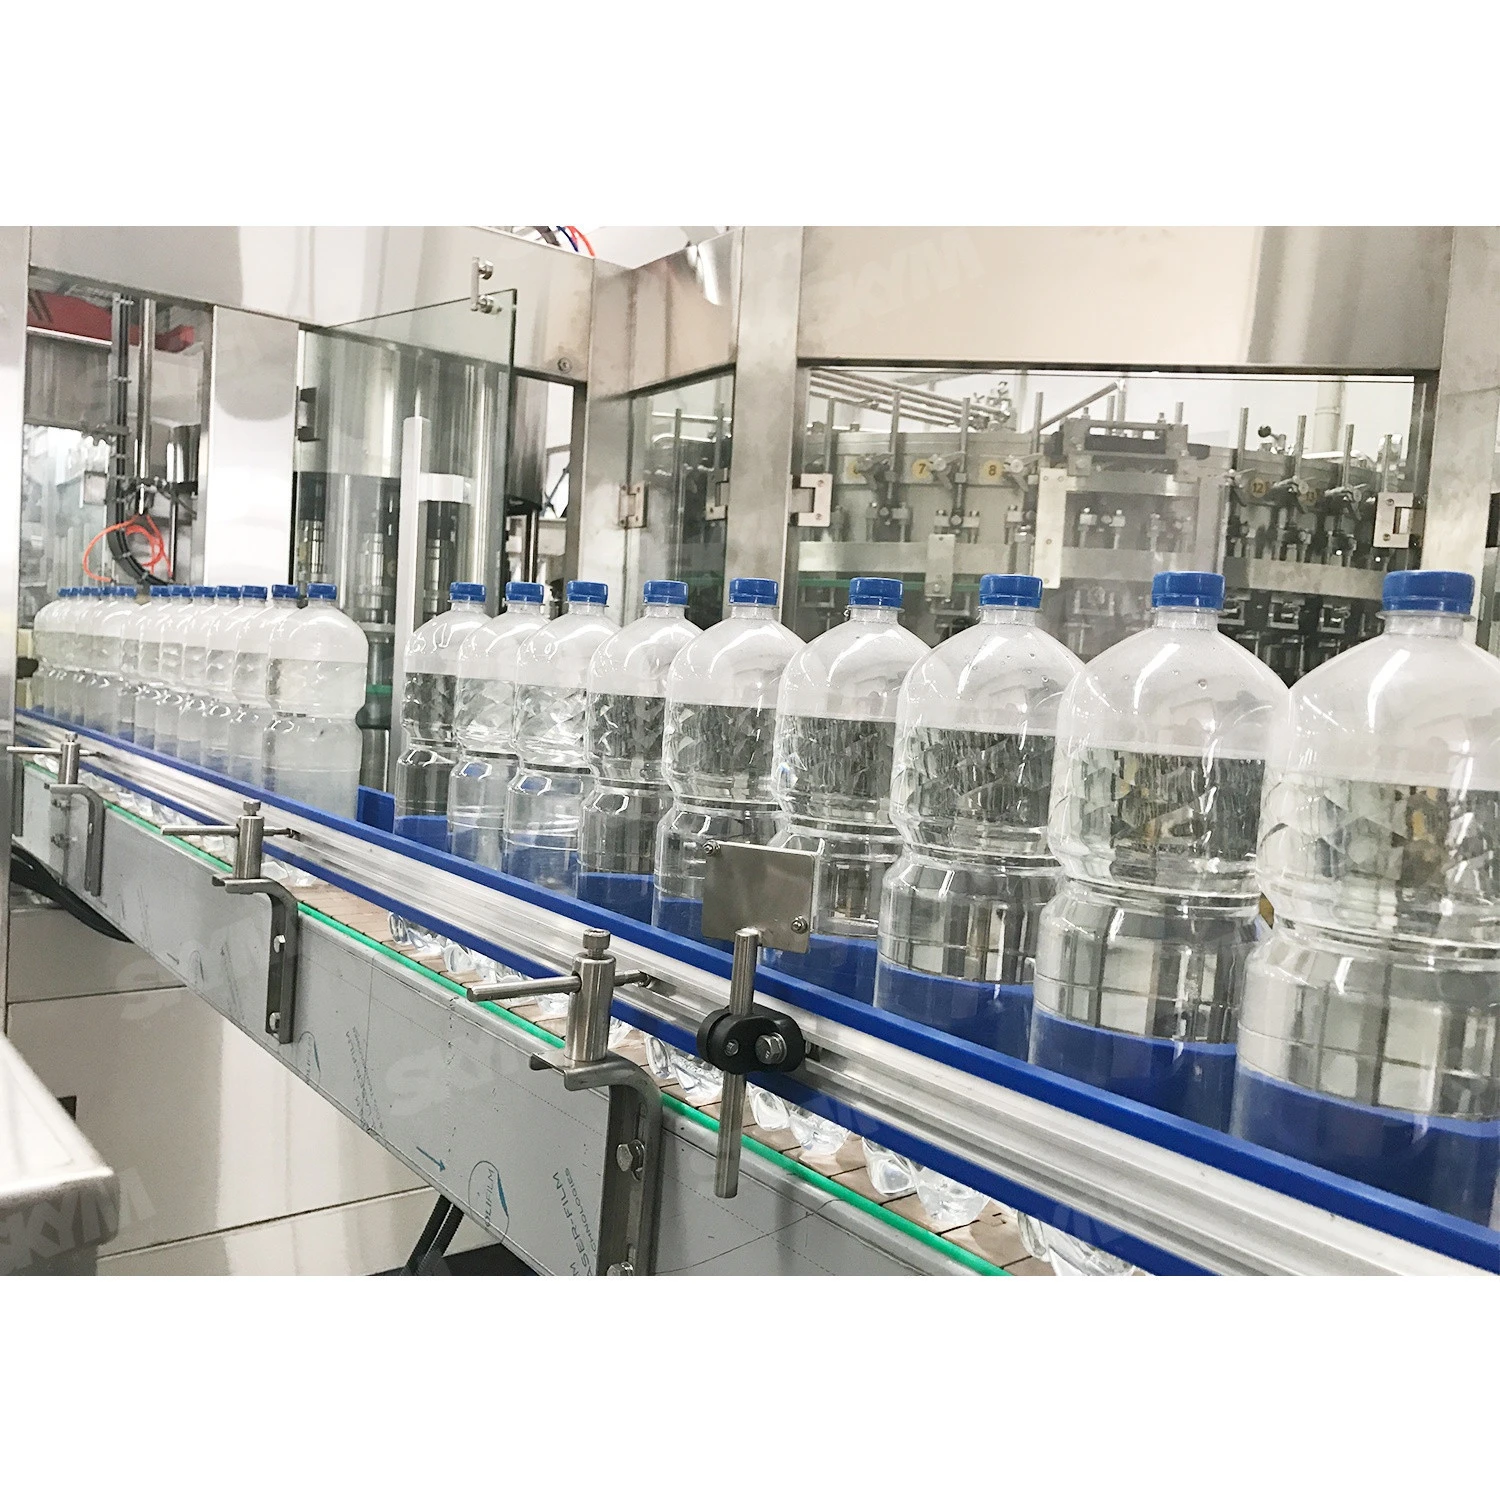 PET / Glass Bottle Carbonated Drinks Filling Machine / Machinery to Make Soft Beverage